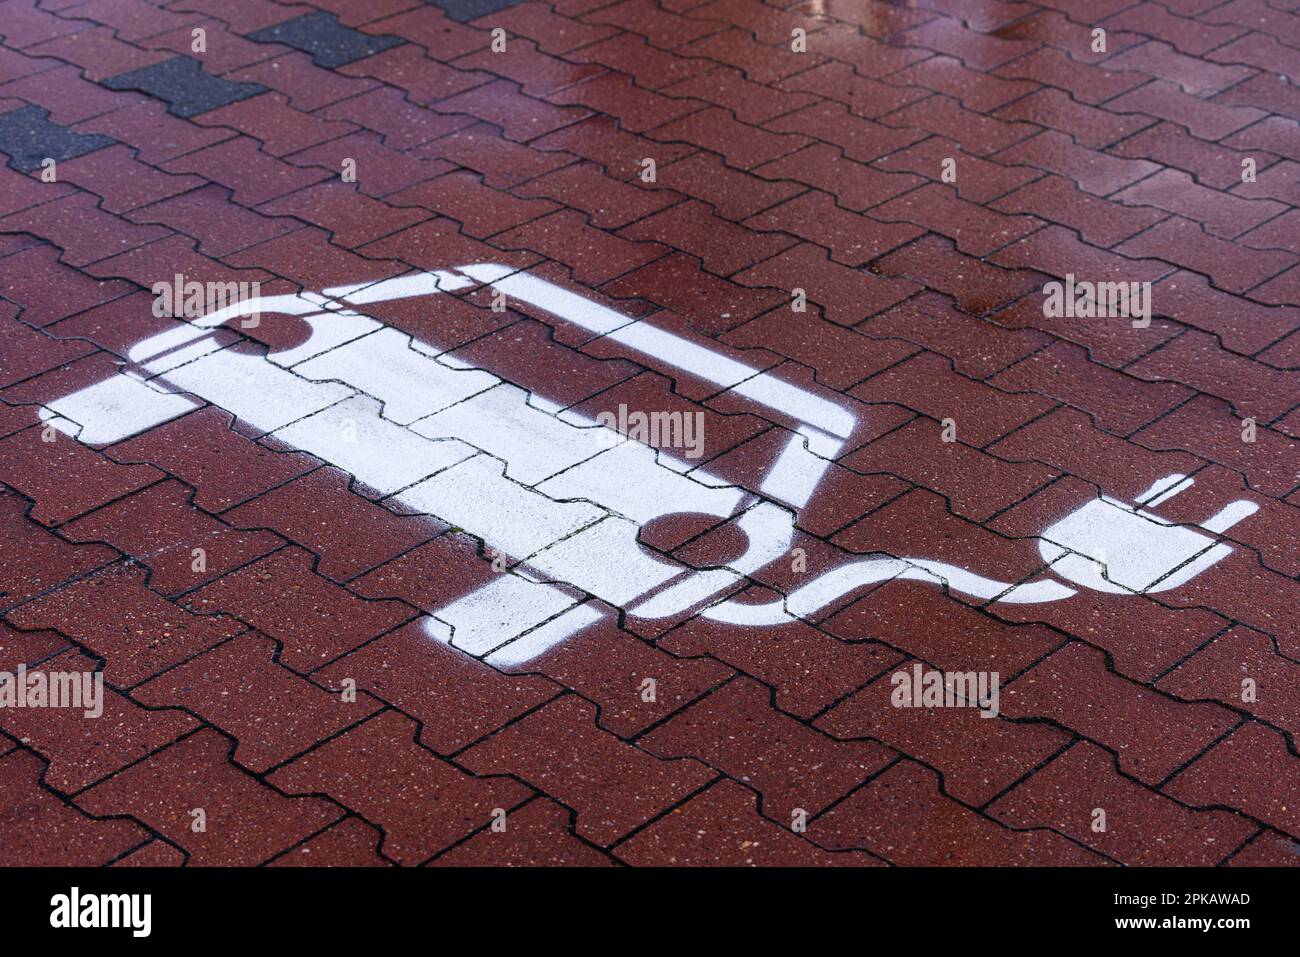 Rainy, ground marking, parking and charging for electric vehicles, detail, Lidl store, Freiligrathstraße, Wilhelmshaven, Lower Saxony, Germany Stock Photo